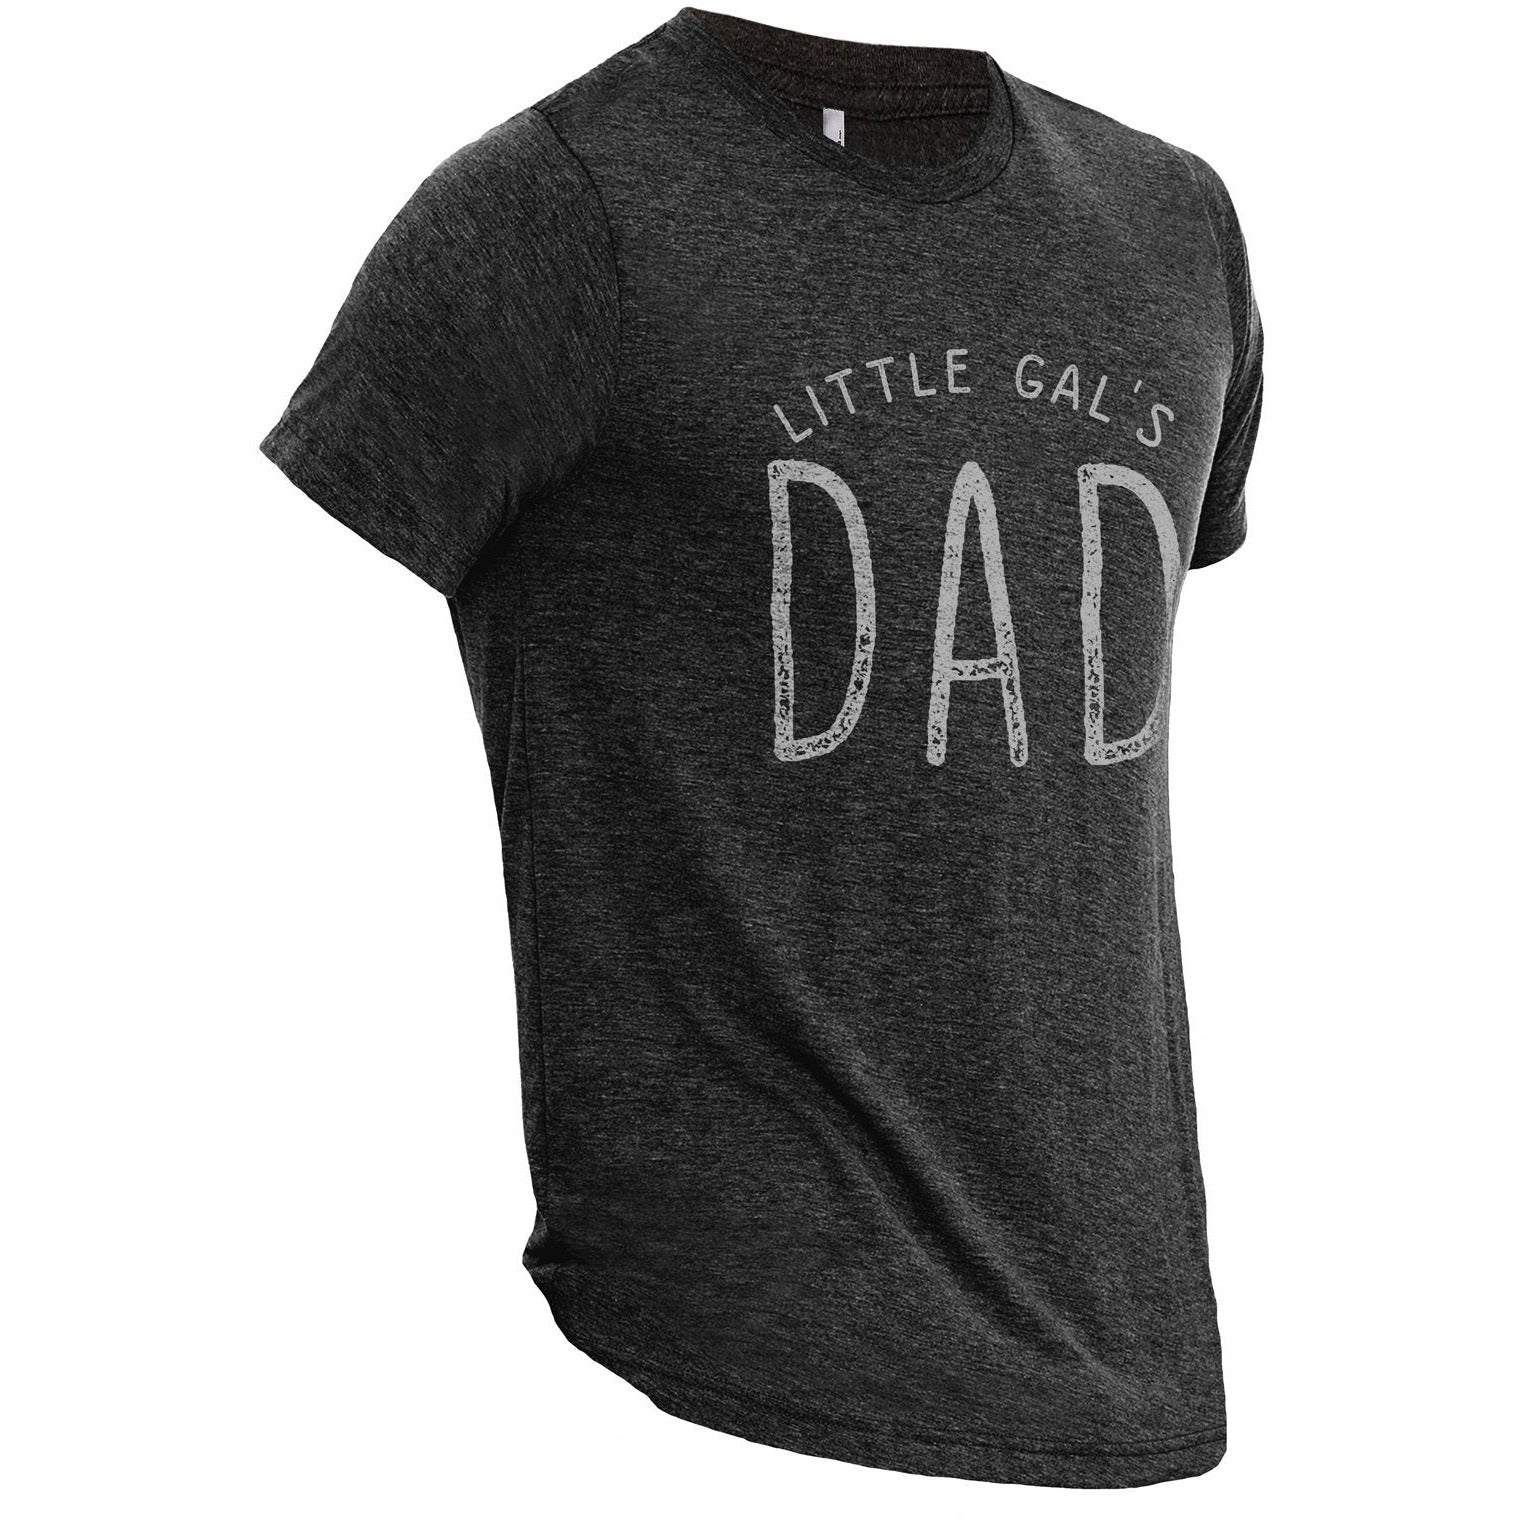 Lil Gal's Dad Charcoal Printed Graphic Men's Crew T-Shirt Tee Side View